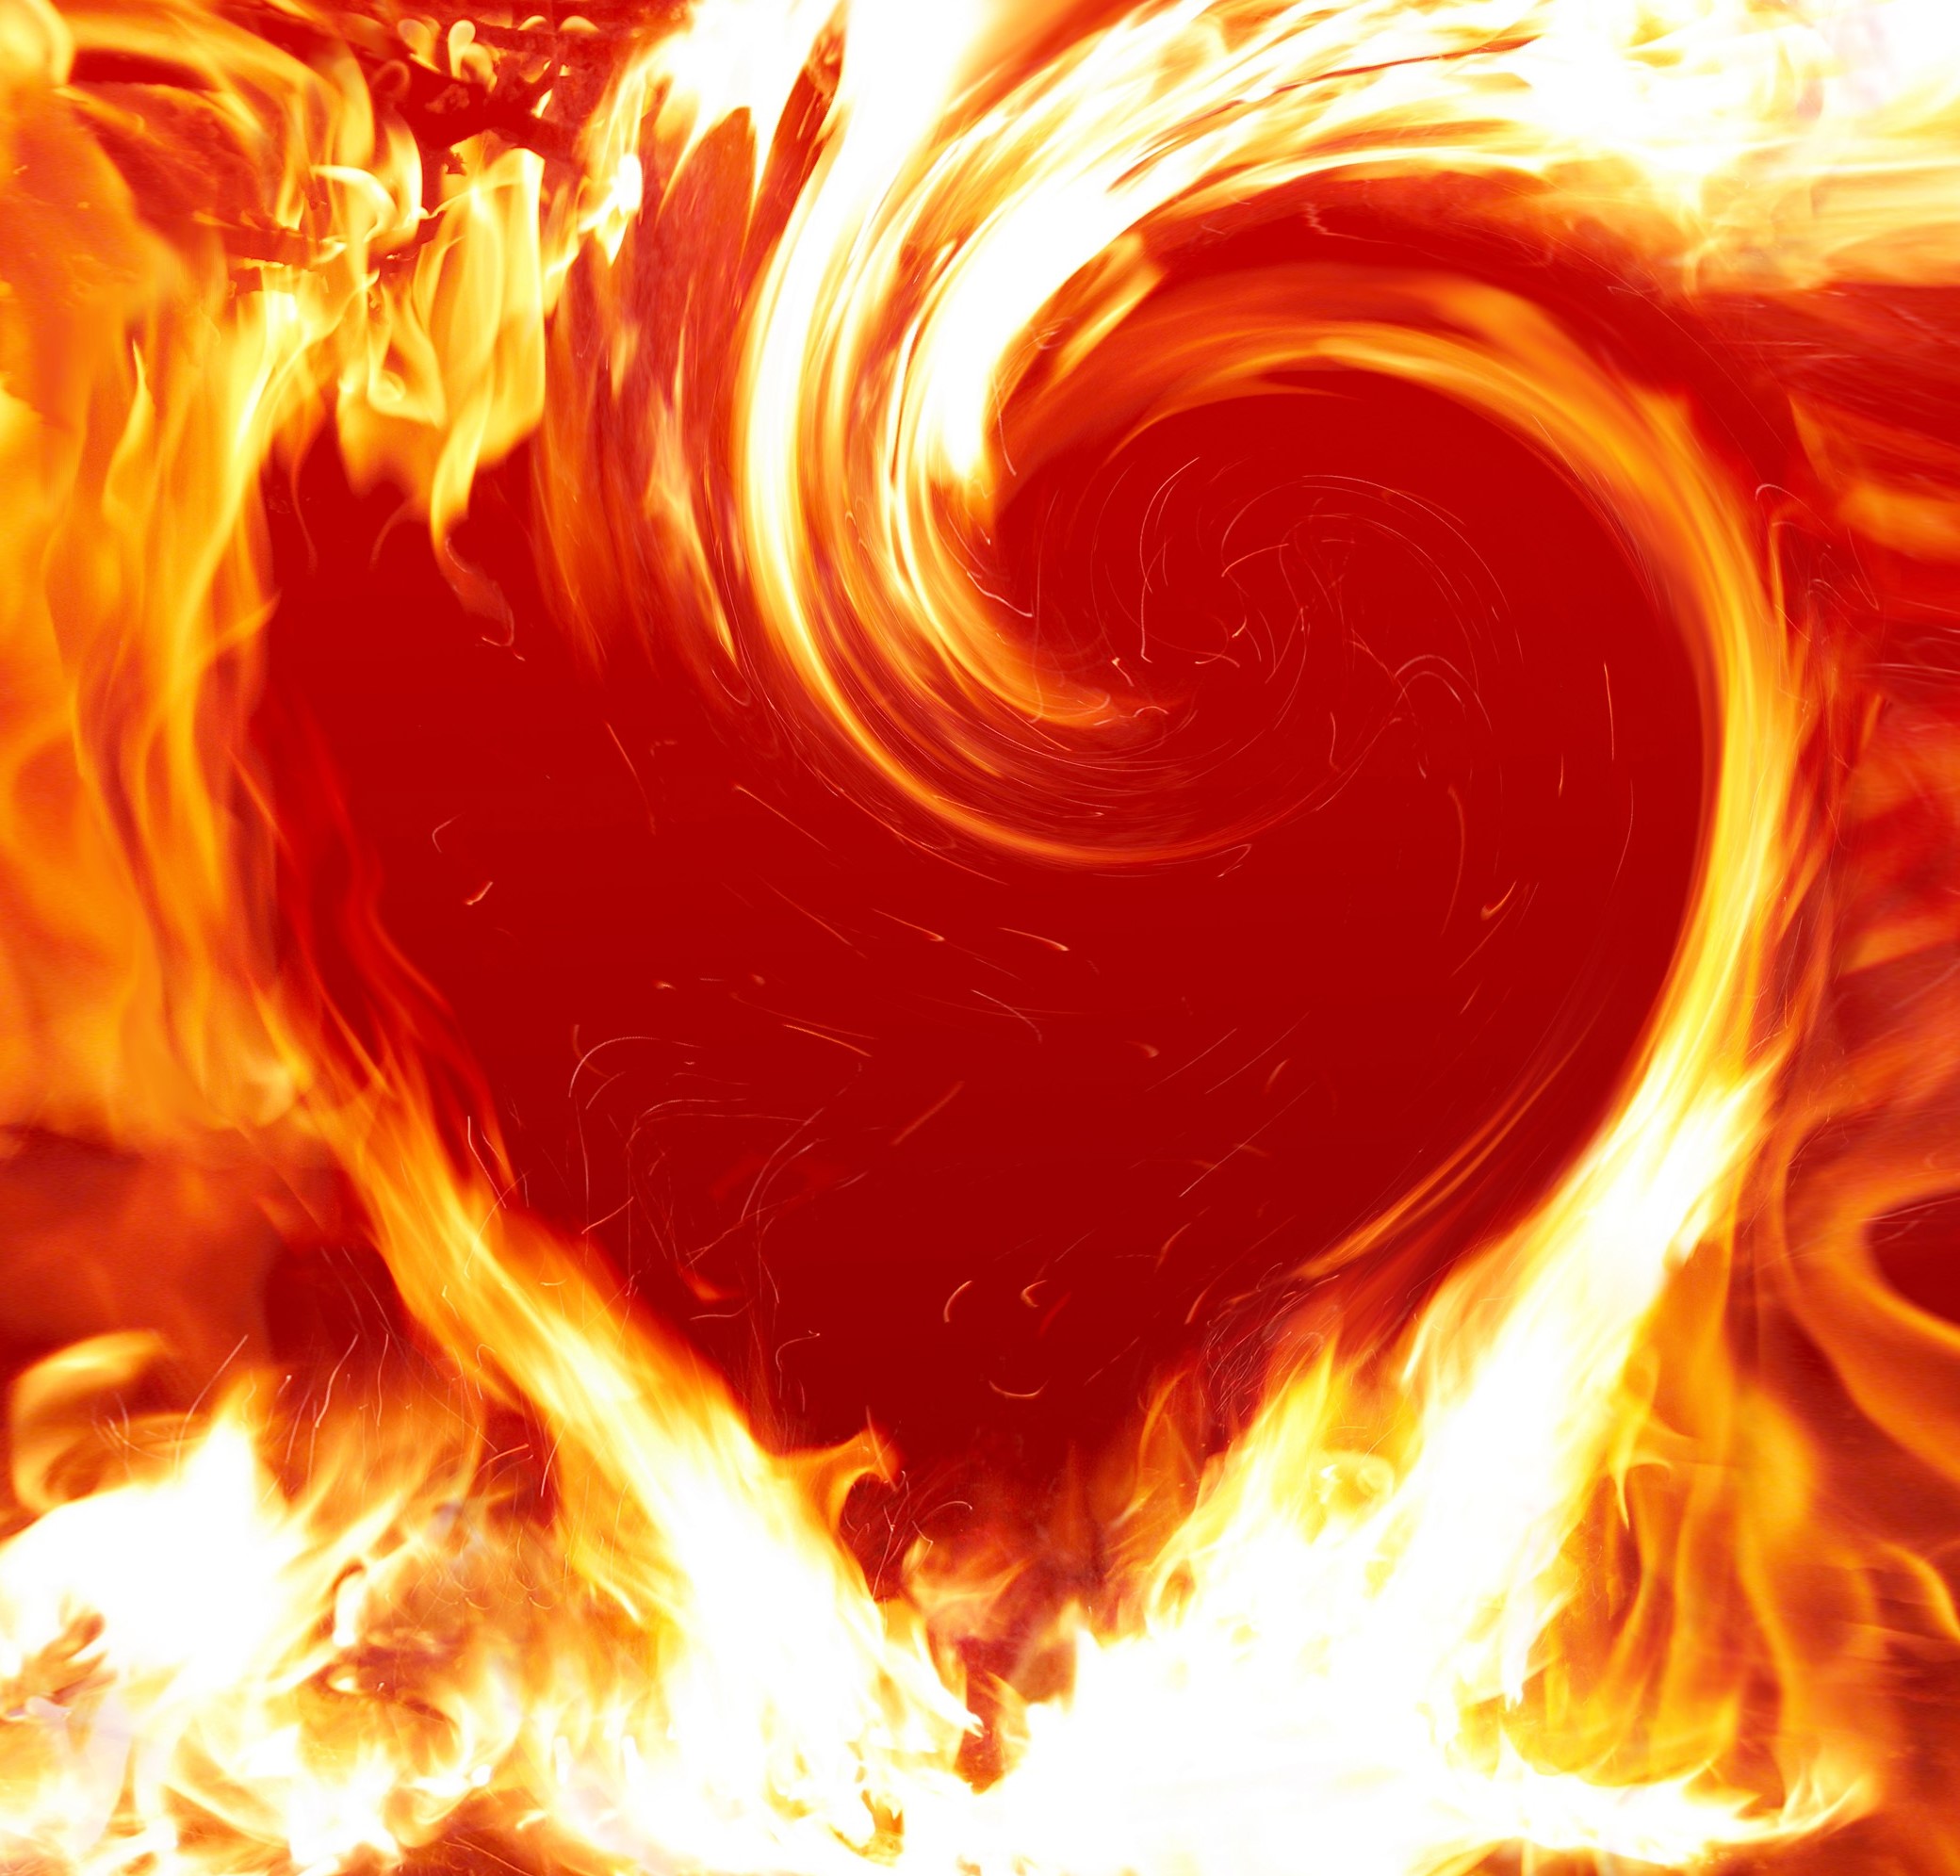 flaming red heart, white yellow flames forming the heart border